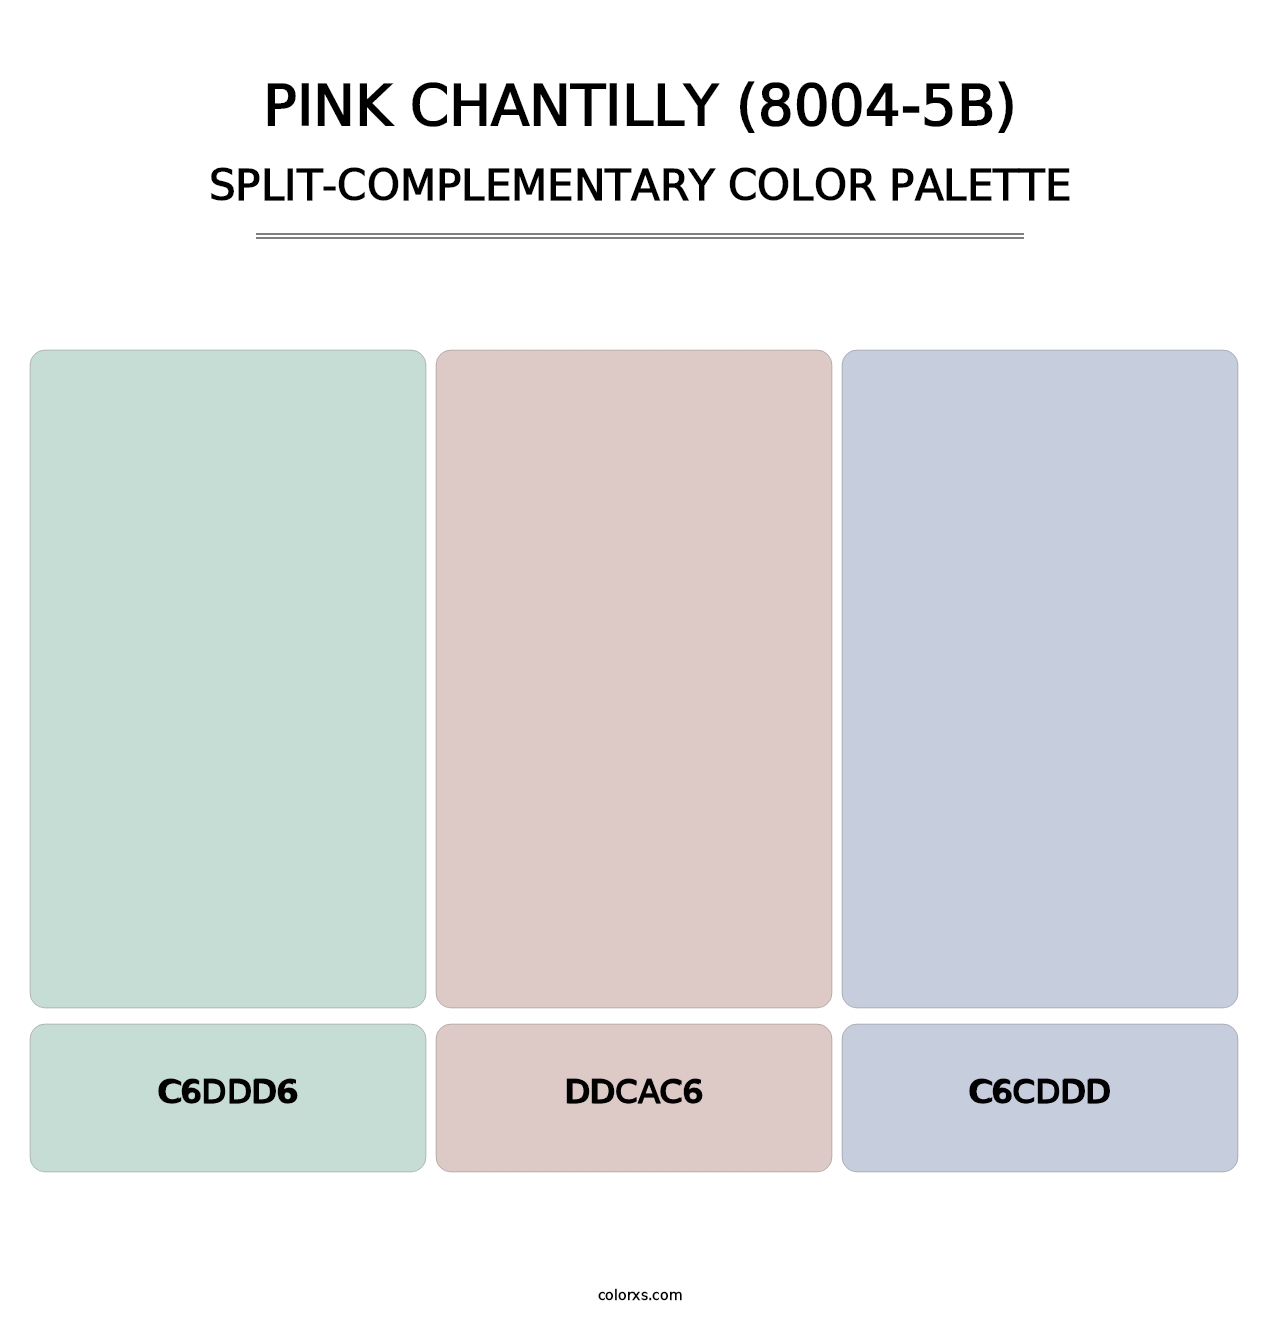 Pink Chantilly (8004-5B) - Split-Complementary Color Palette